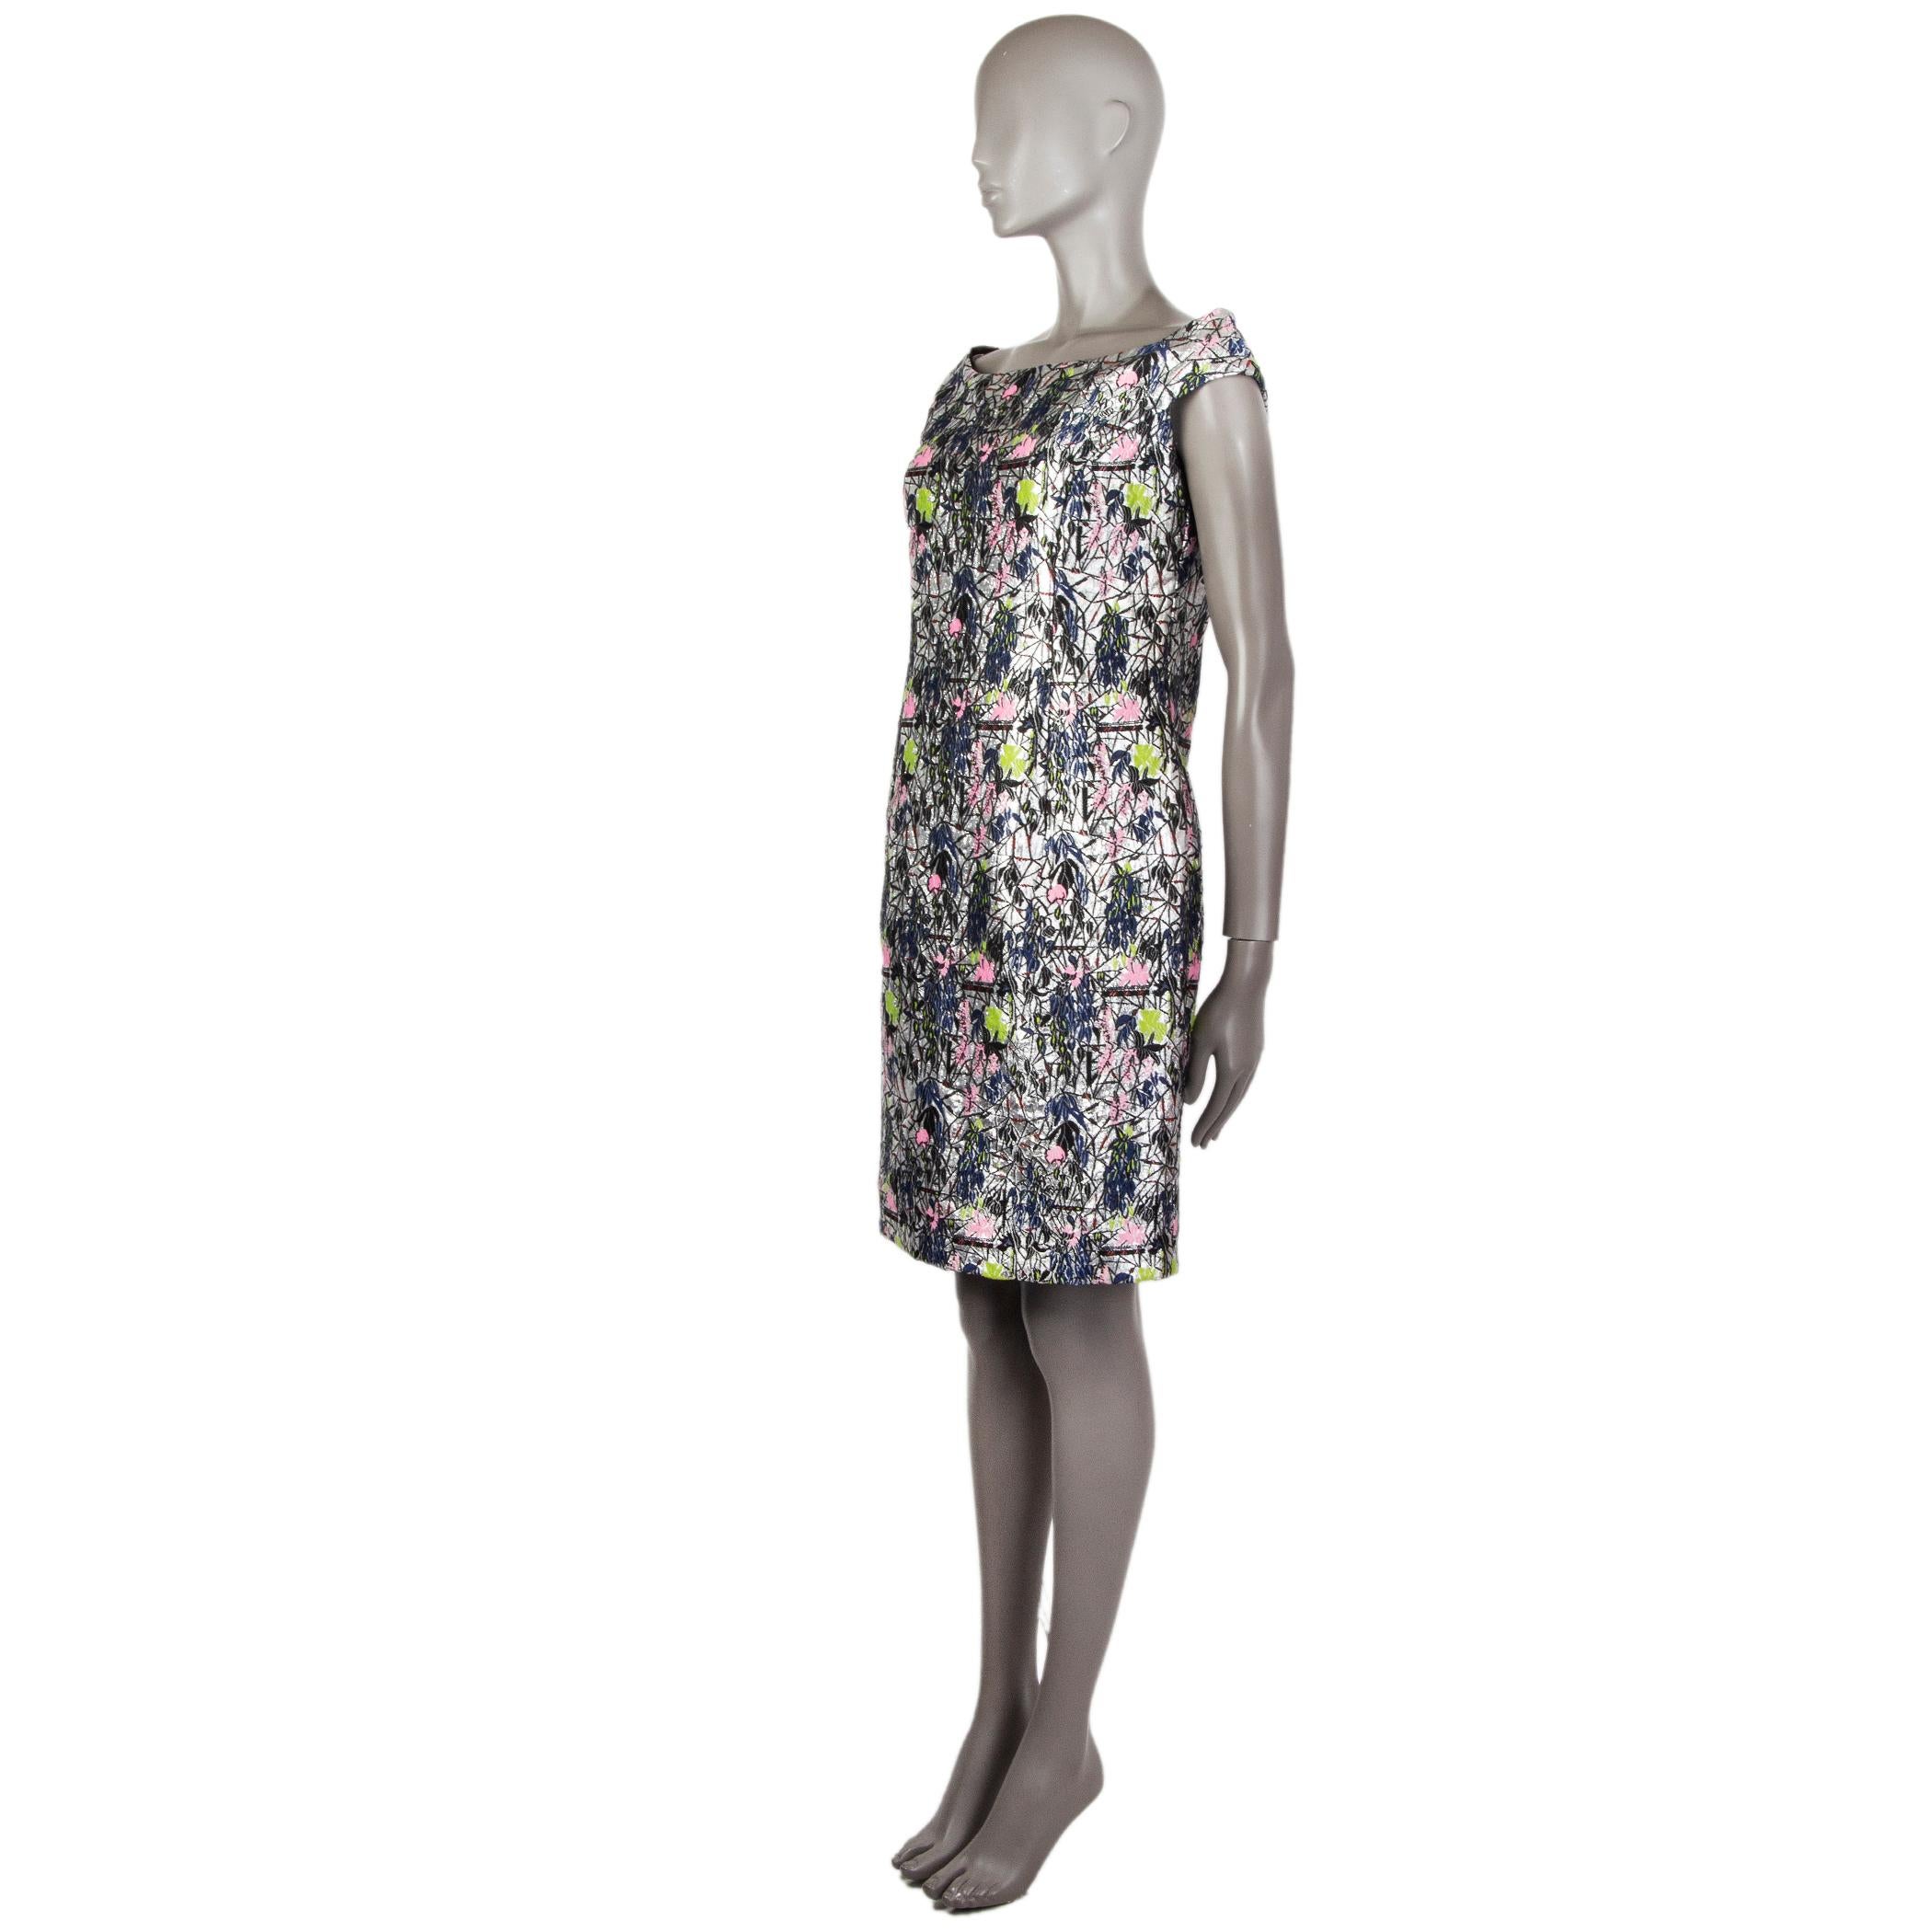 Christian Dior floral borcade sheath dress in silver, indigo, pink, chartreuse, black, and red polyester (67%) and nylon (13%). With boat neck and cap sleeves. Closes with hook and invisible zipper on the back. Lined in black silk (100%). Has been